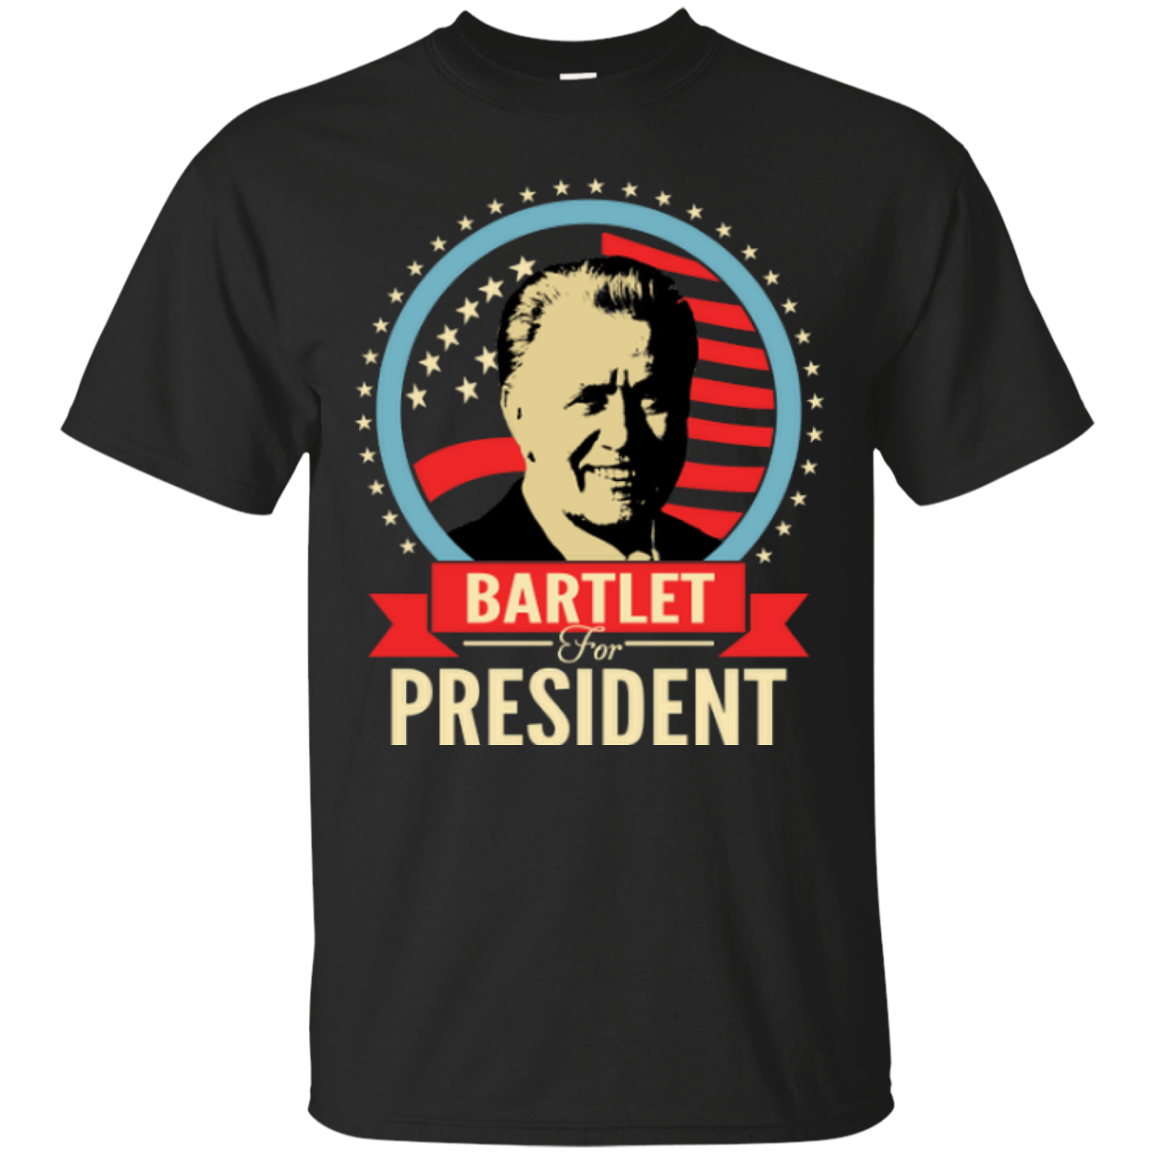 Bartlet For President Shirts/Hoodies/Tanks - ifrogtees